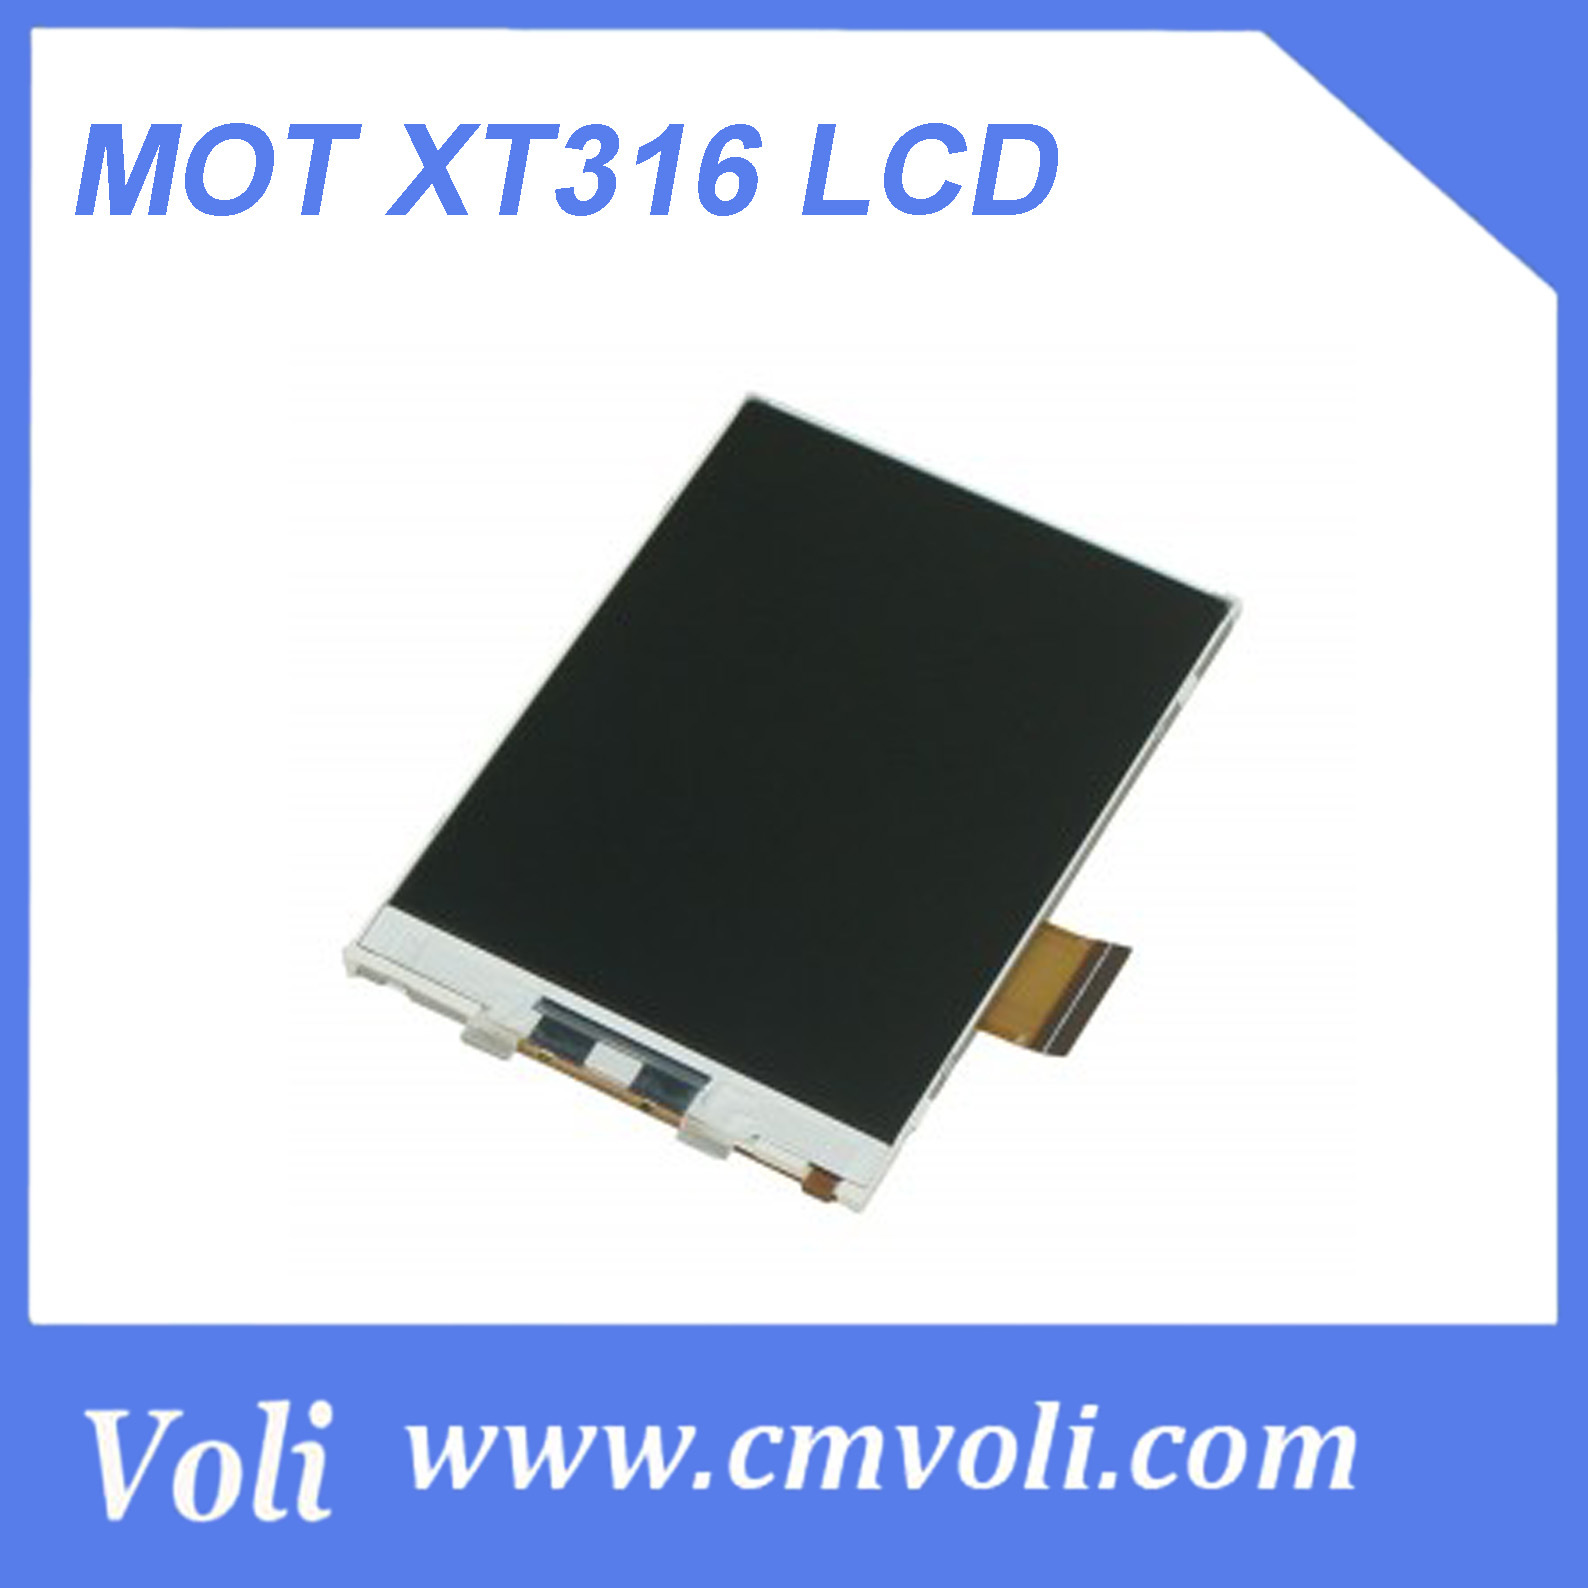 Mobile Phone LCD for Motorola Xt316 LCD Screen Replacement